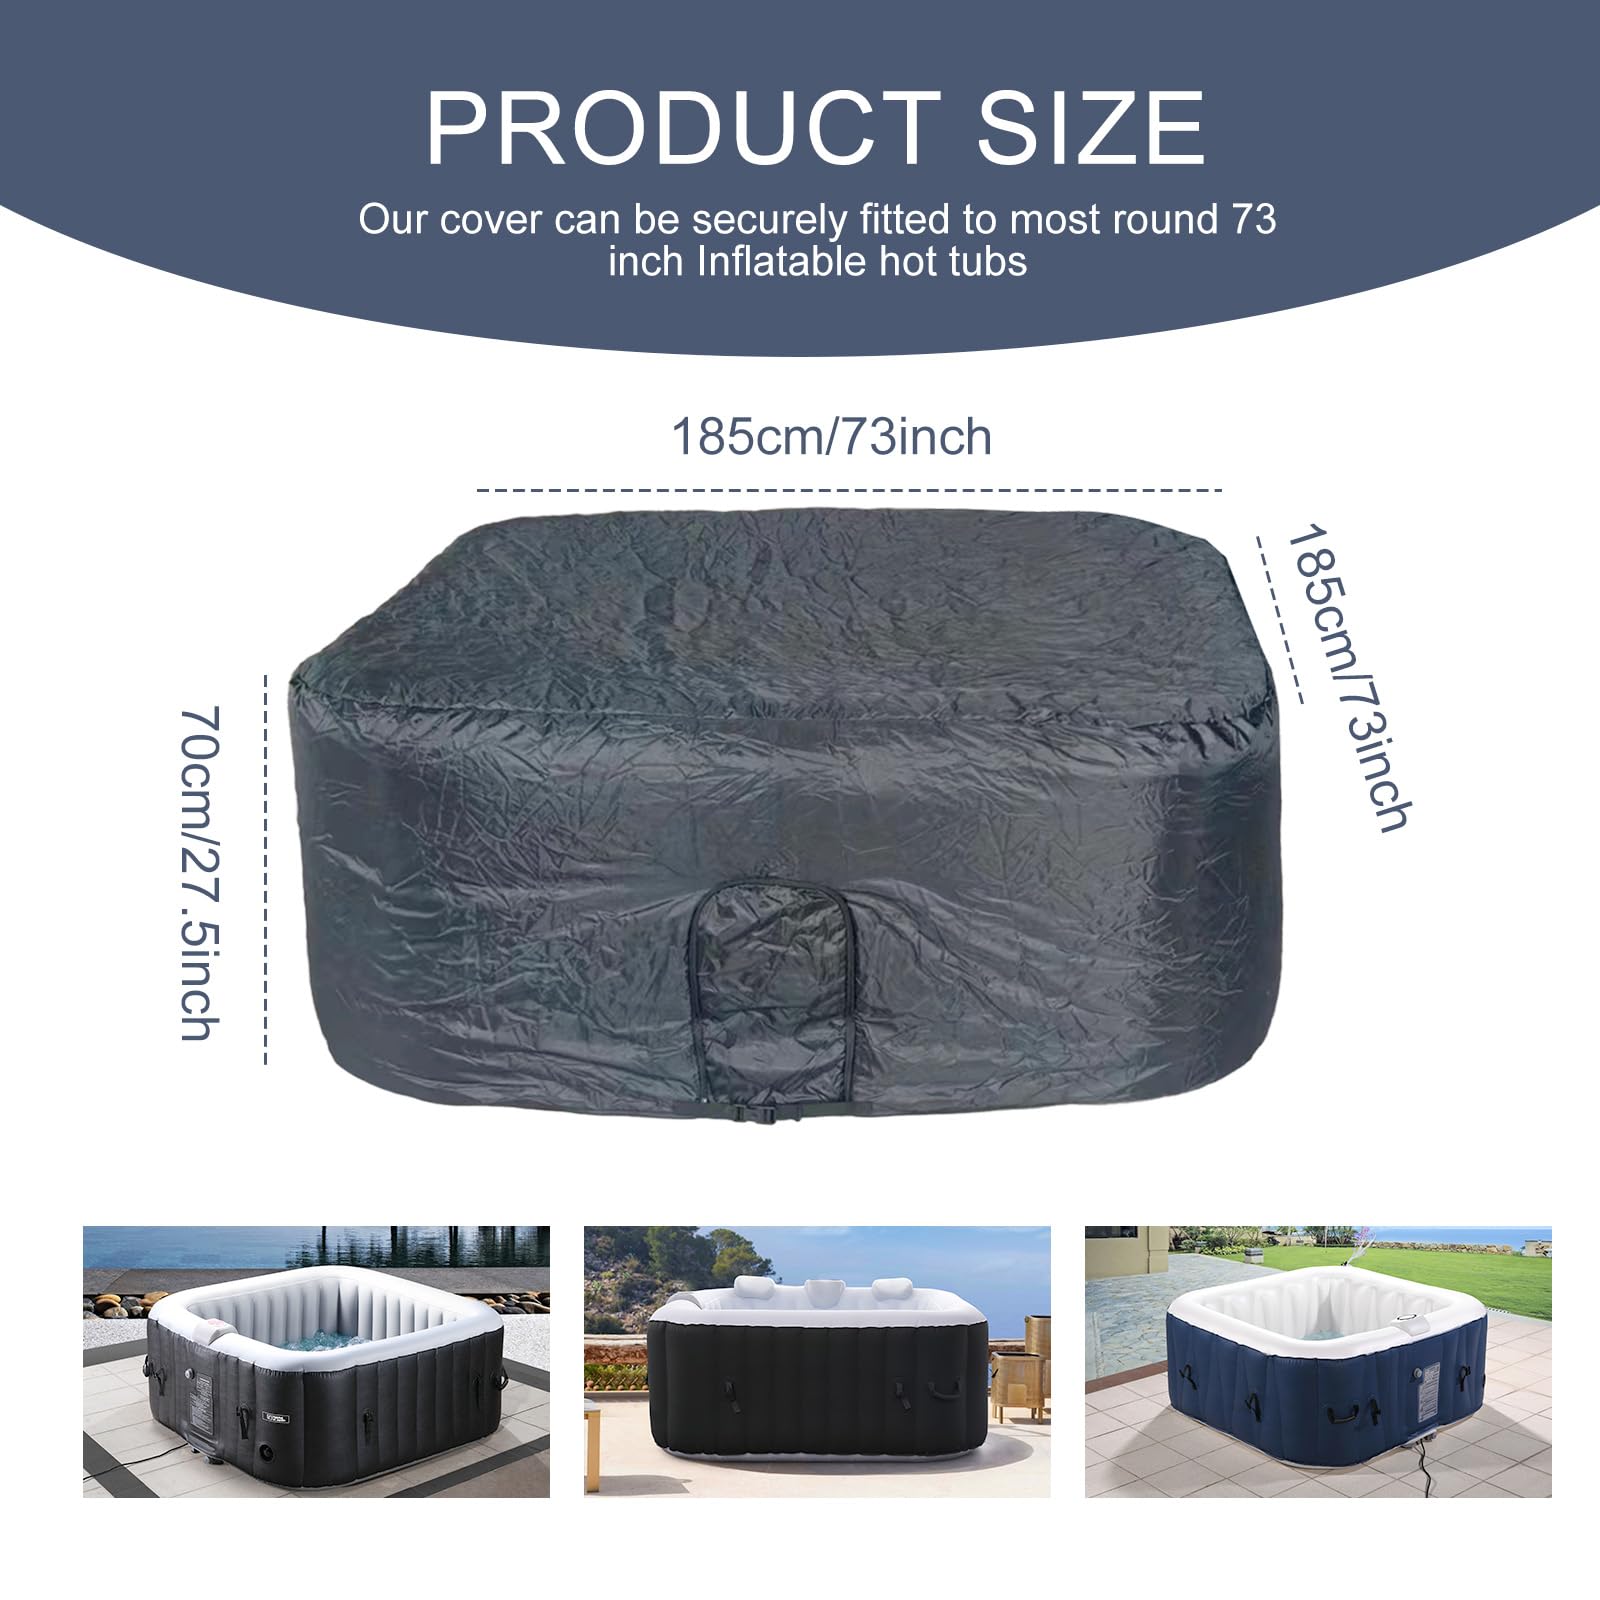 Relxtime Insulated Inflatable Hot Tub Thermal Cover, for 73 inch (6 Person) Square Inflatable Hot Tub